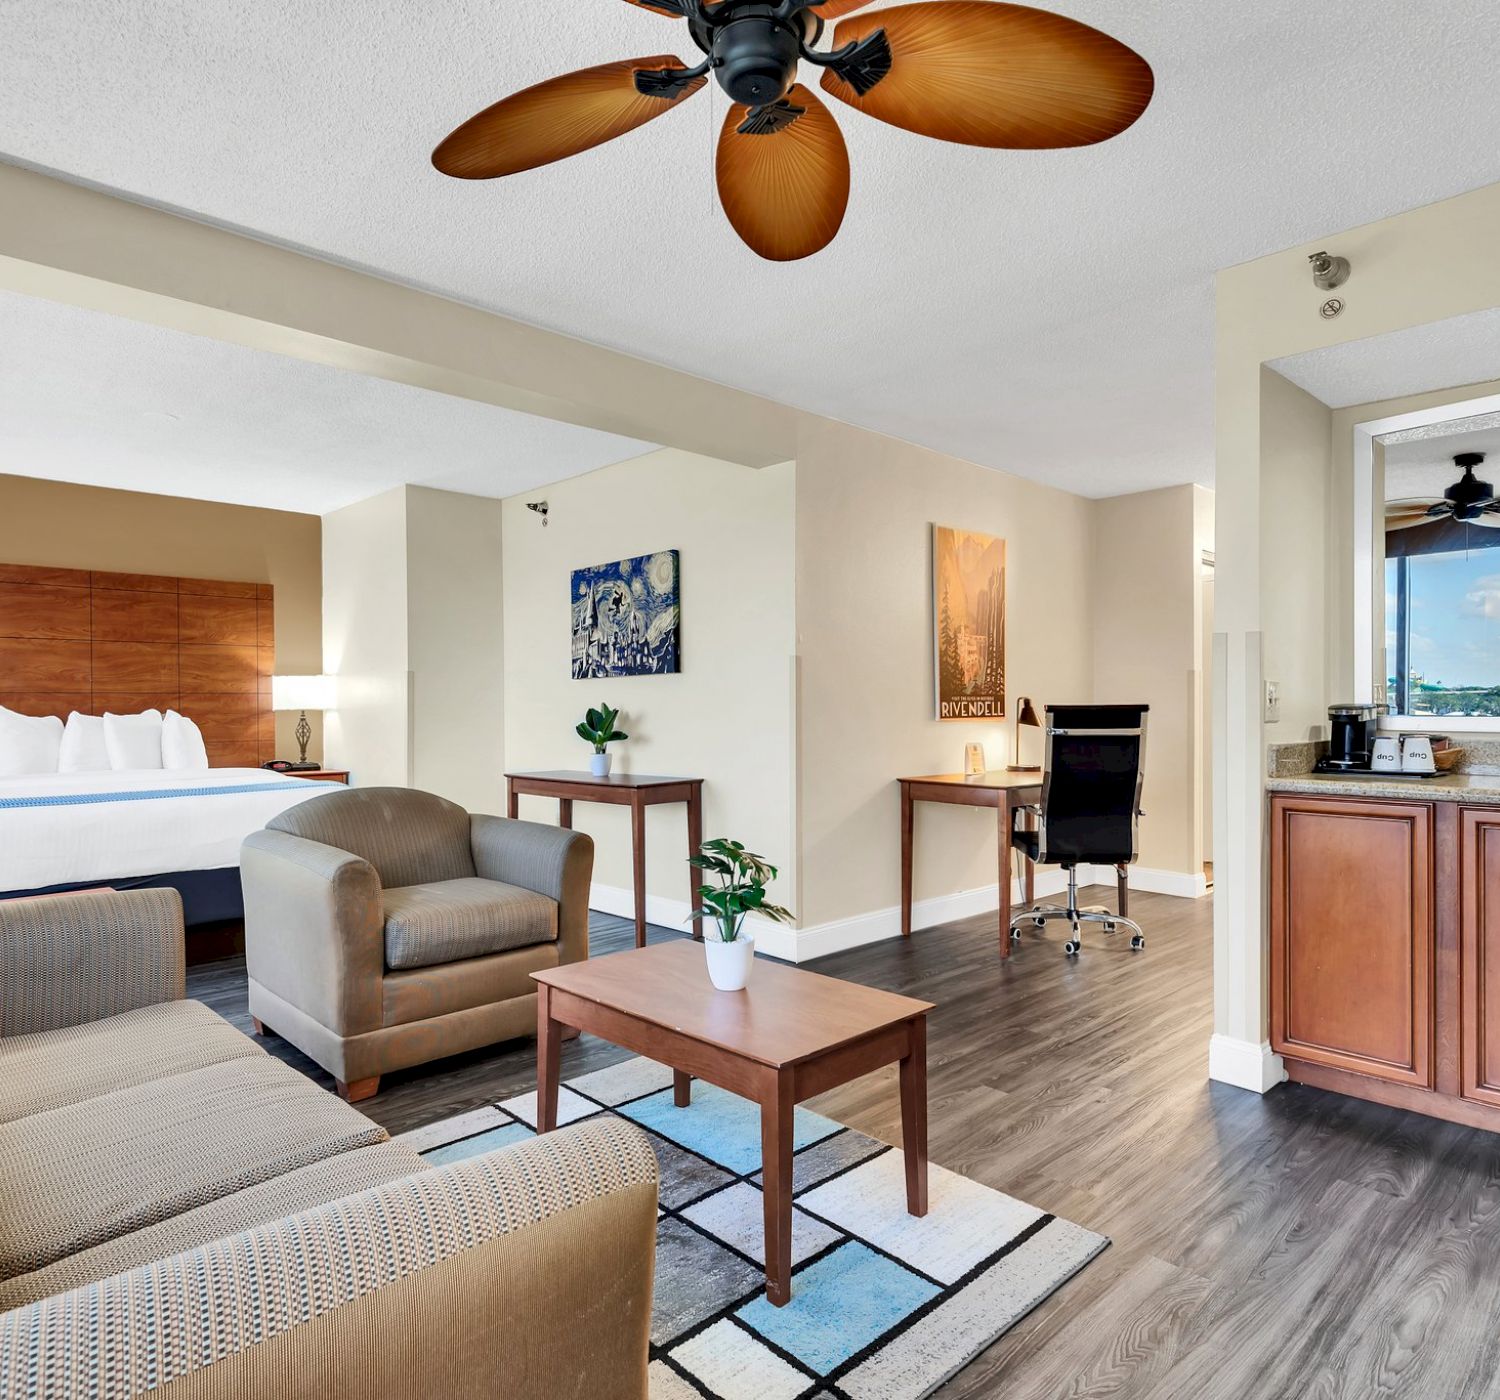 This image shows a modern hotel room with a bed, a sitting area, a work desk, a kitchenette, and a ceiling fan.